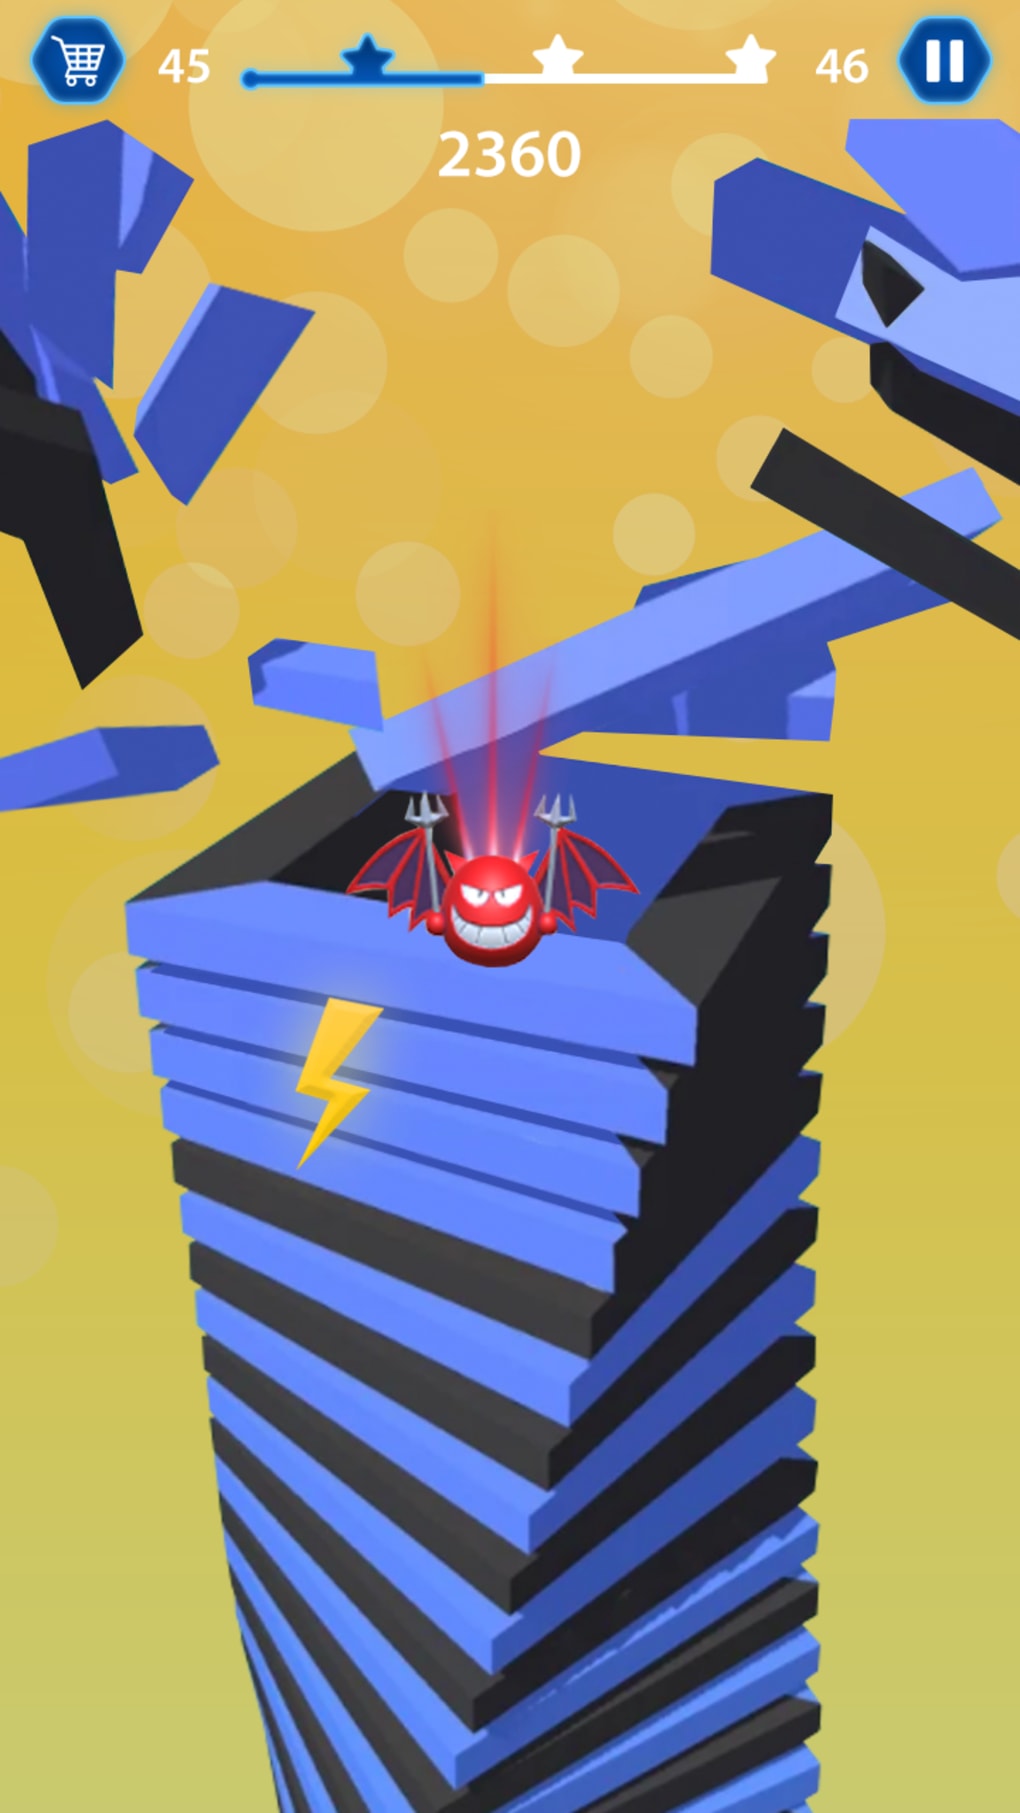 Stack Ball - Helix Blast for iphone download